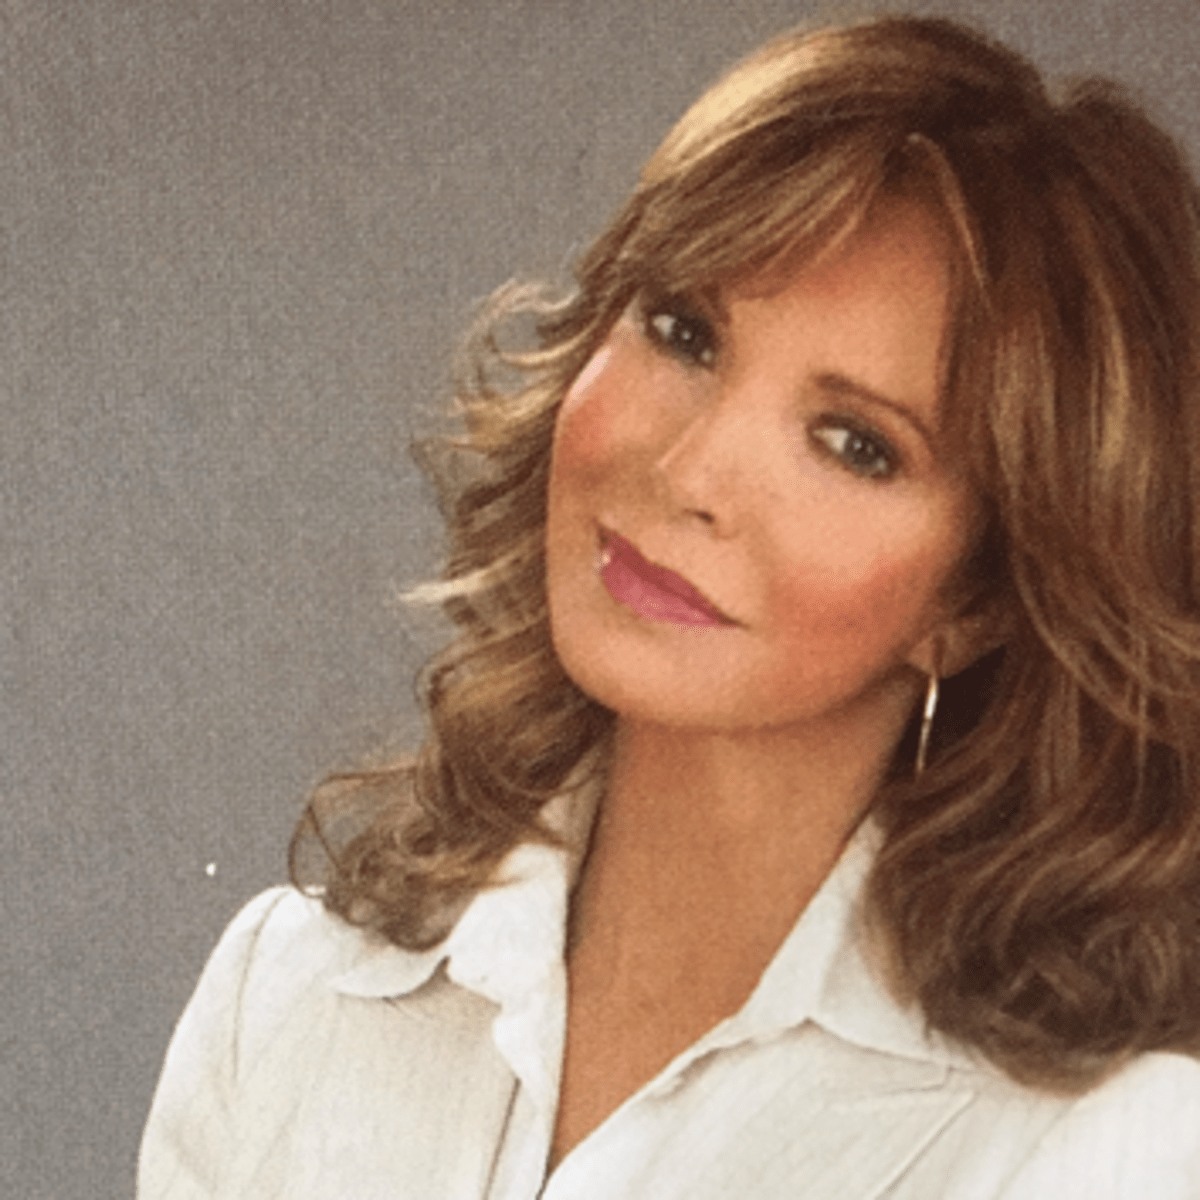 Pictures jaclyn smith Jaclyn Smith